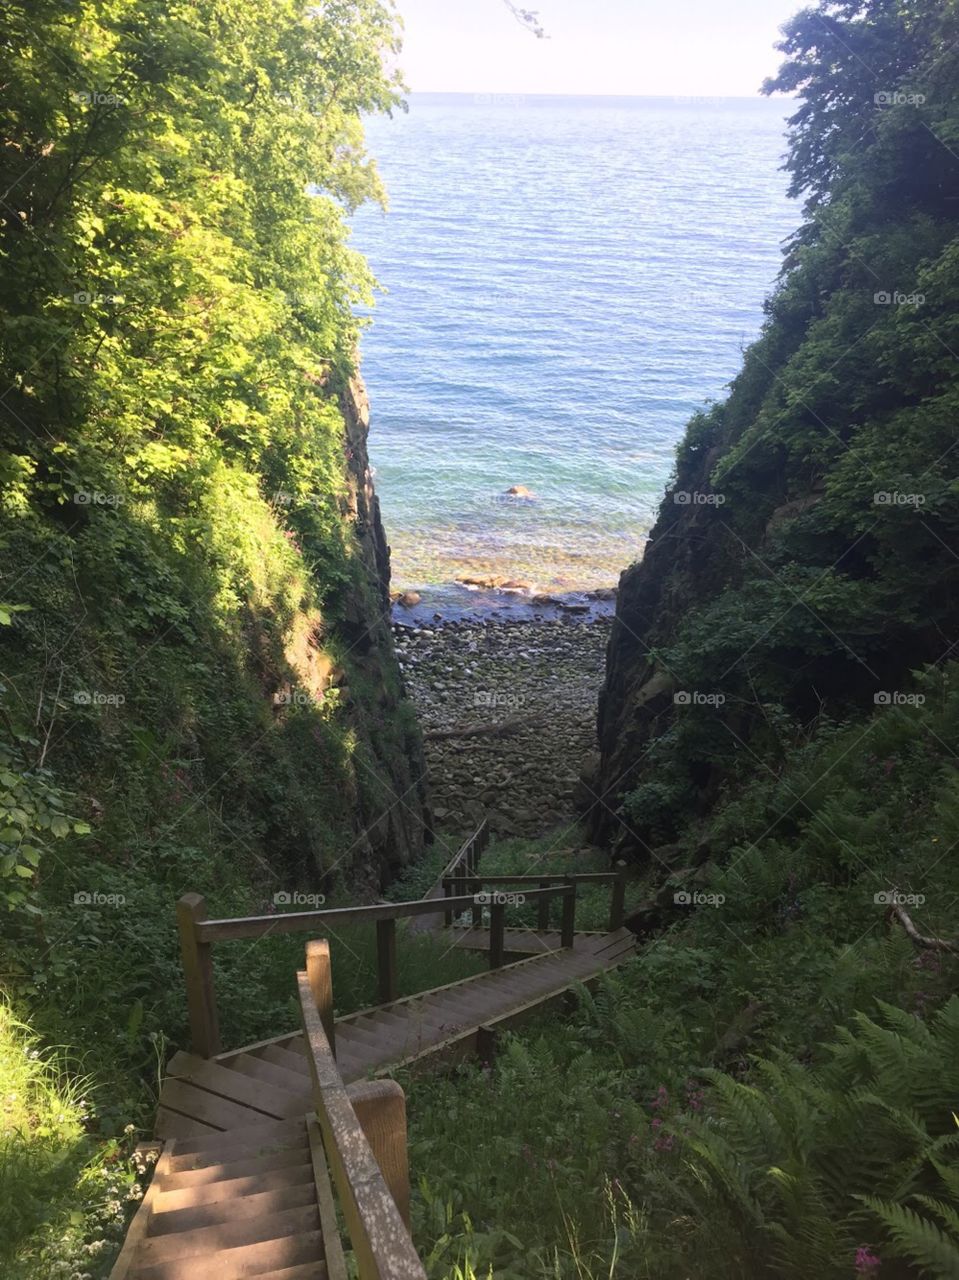 Stairway leads down the greenery covered cliff to a hidden rocky beach. Blue water laps at the shore. 